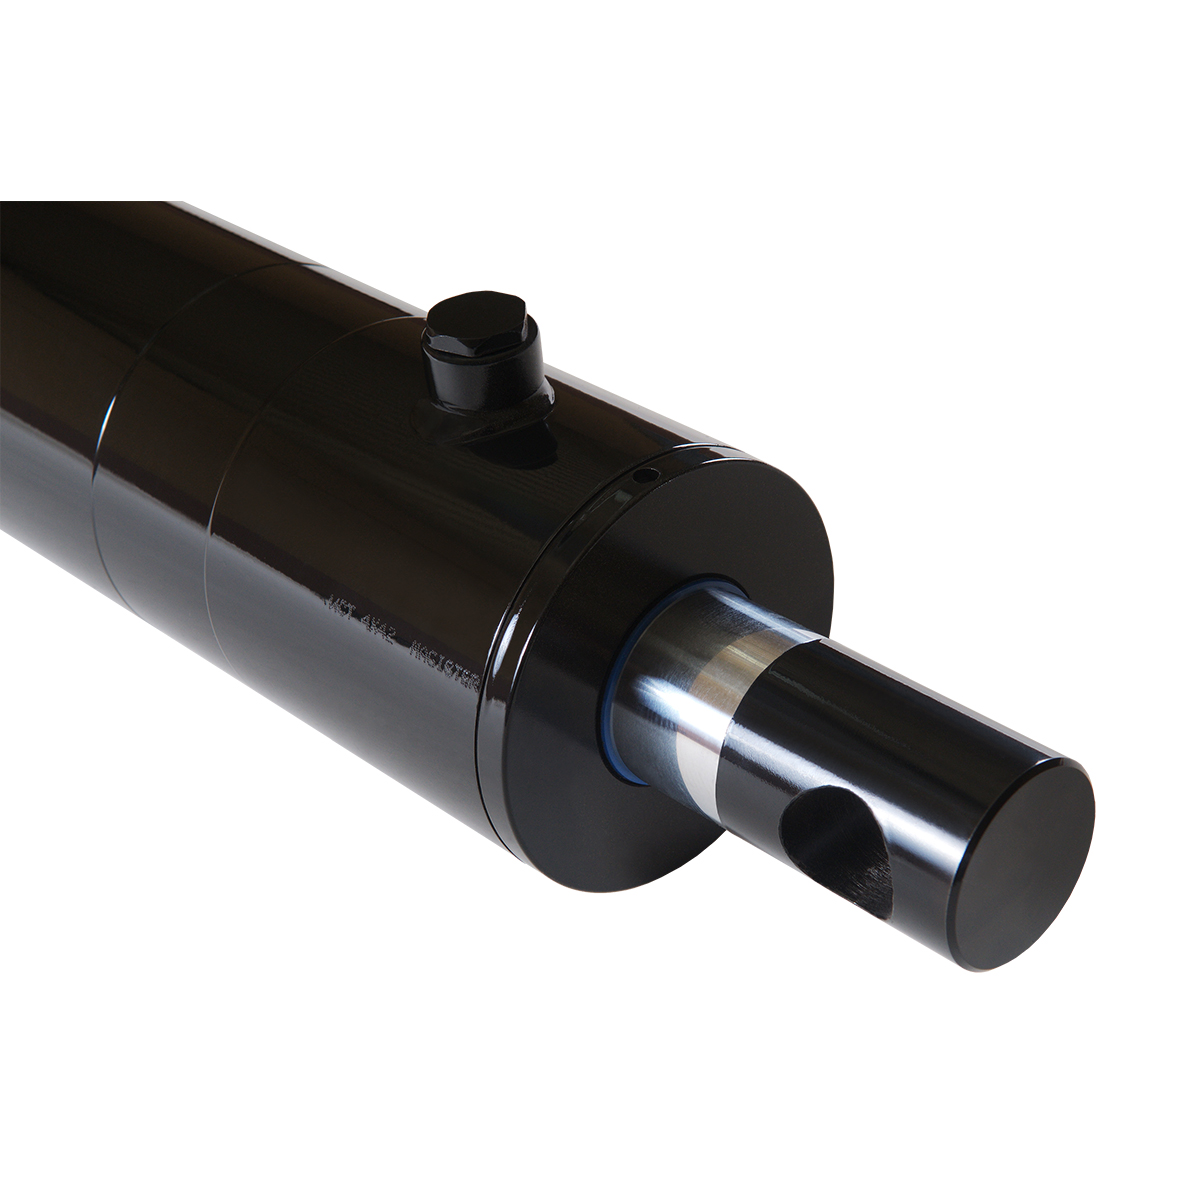 3.5 bore x 8 stroke hydraulic cylinder, welded pin eye double acting cylinder | Magister Hydraulics